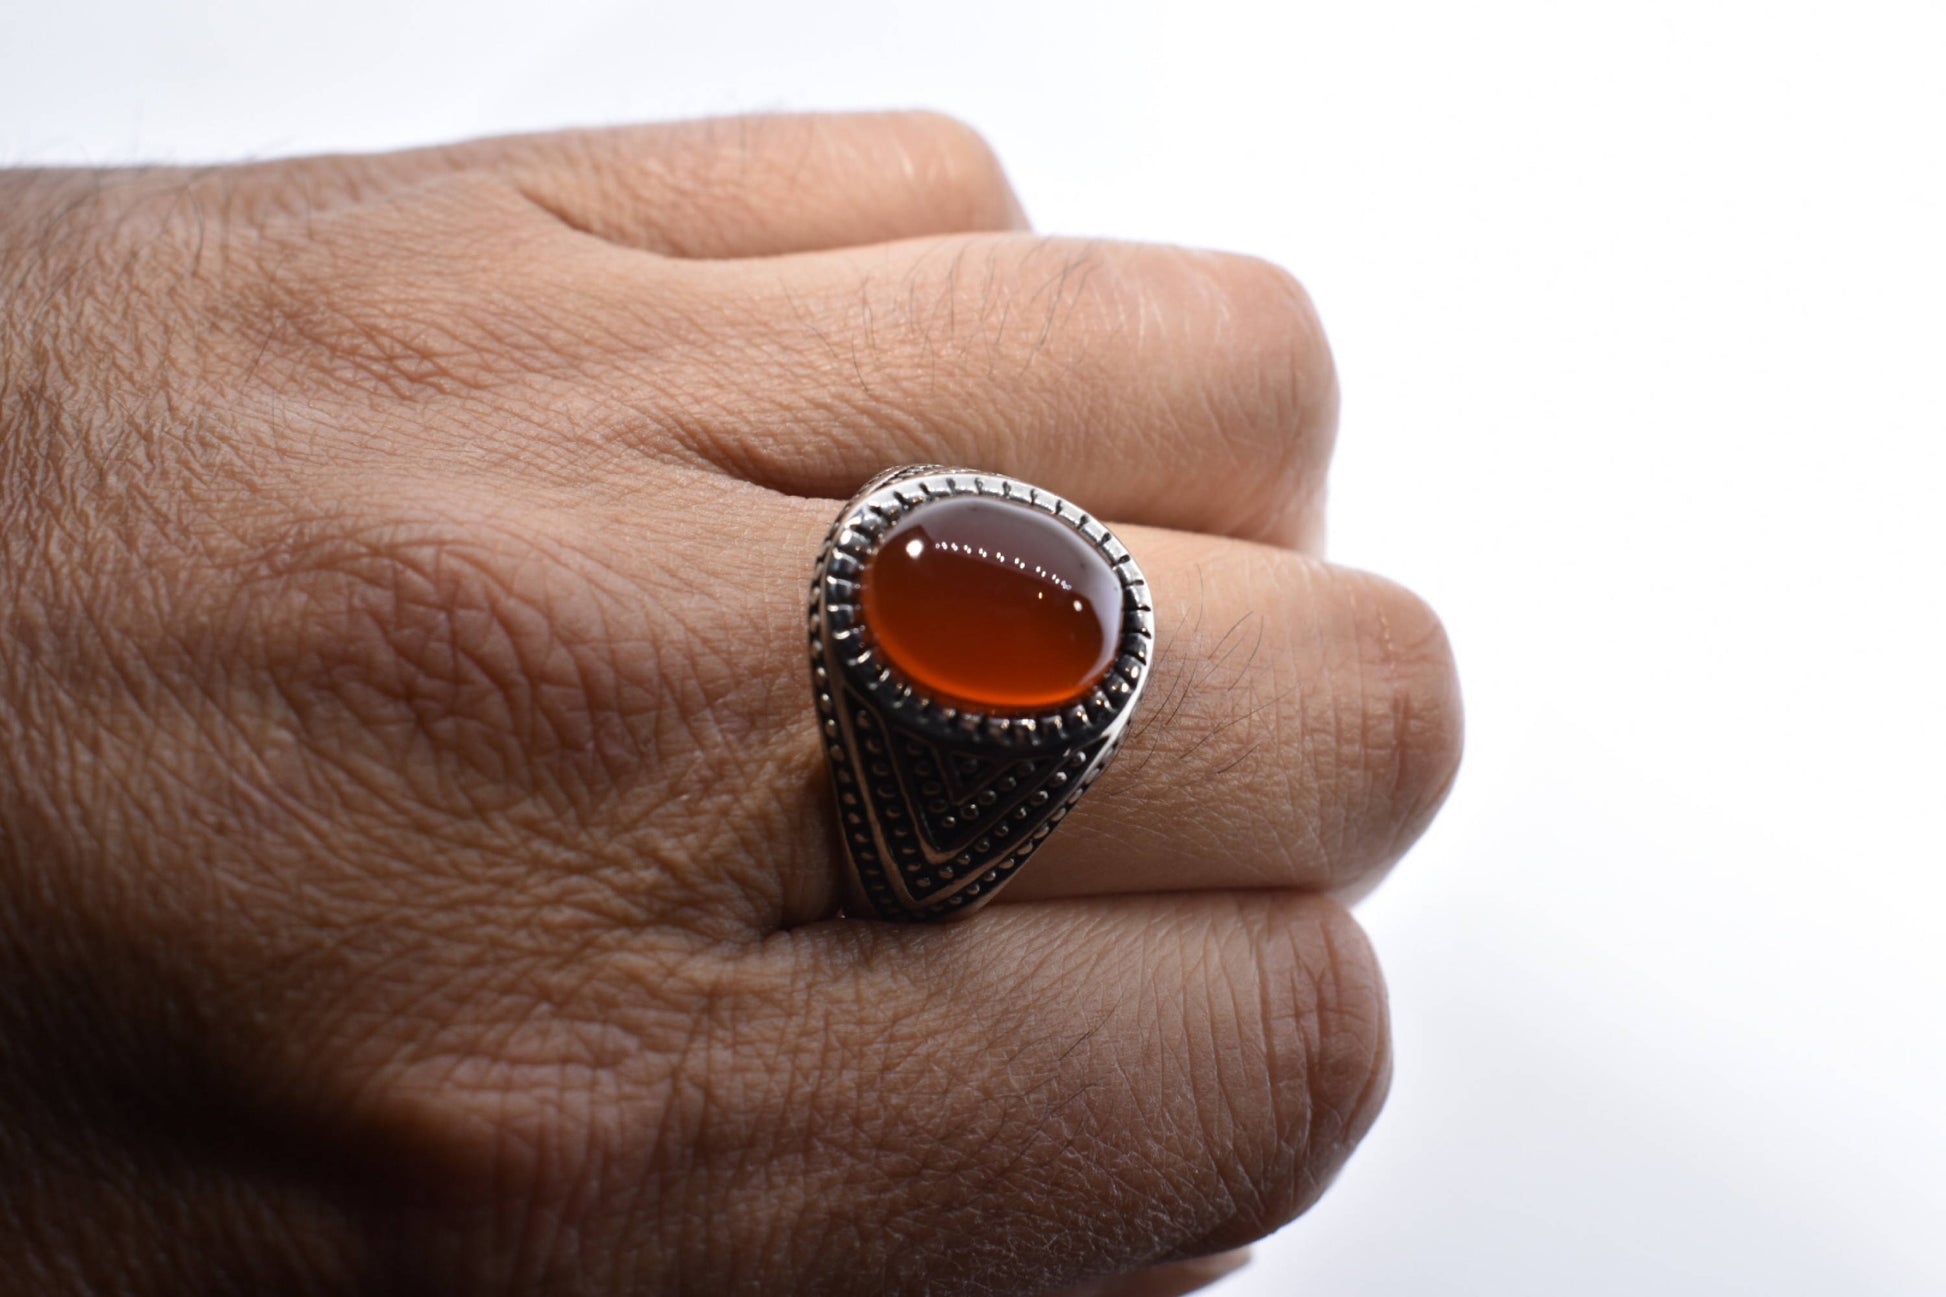 Vintage Gothic Genuine Red Carnelian Silver Stainless Steel Mens Ring